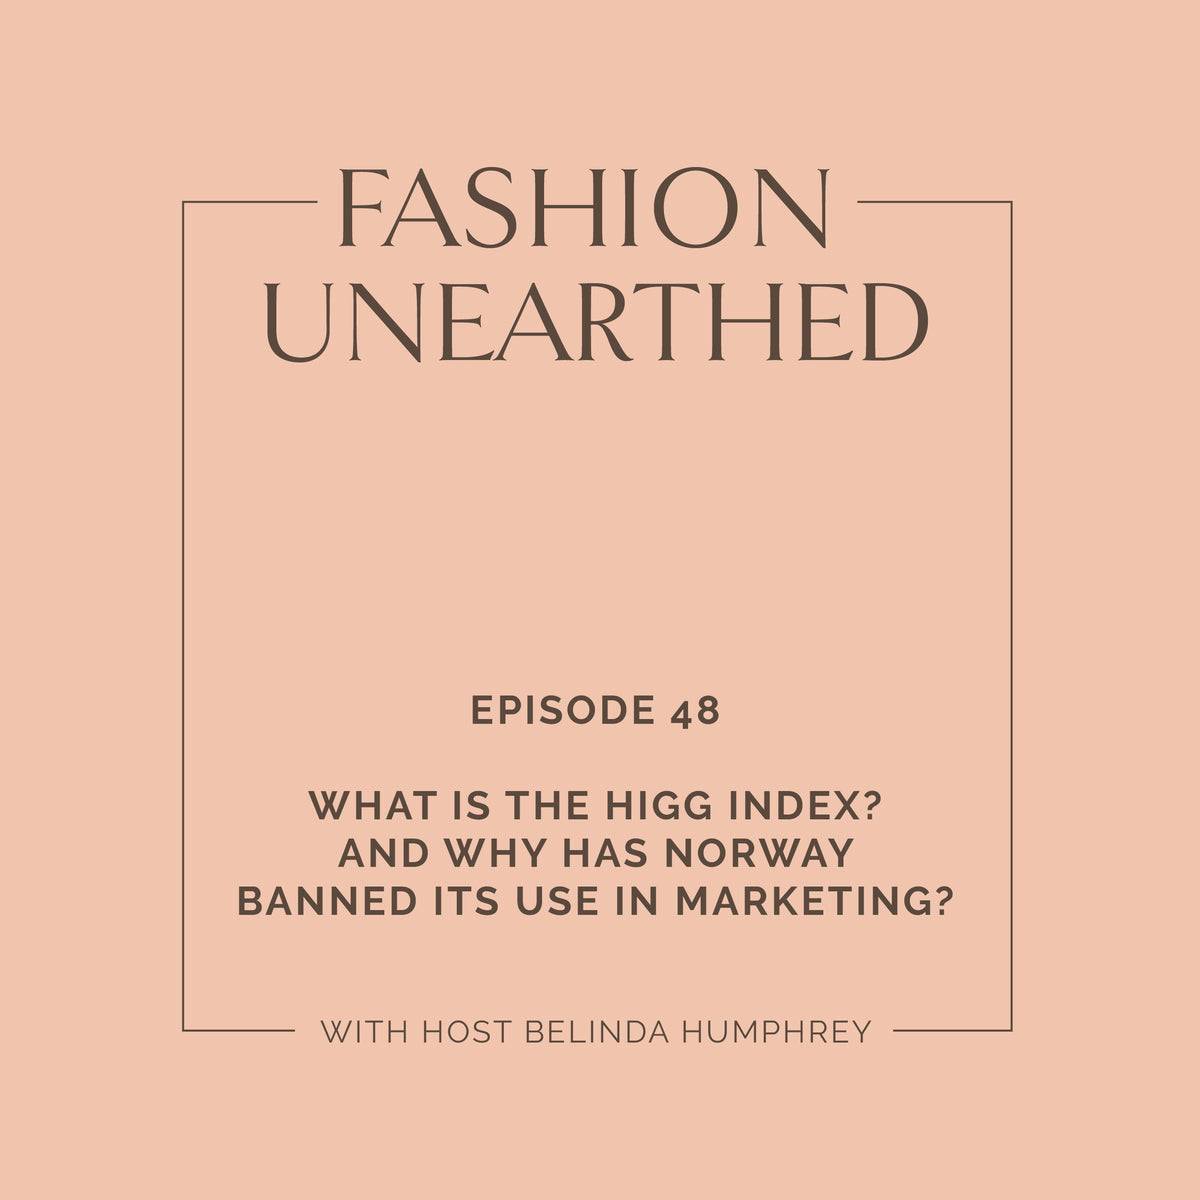 Episode 48: What is the HIGG index? and why has Norway banned its use in marketing?